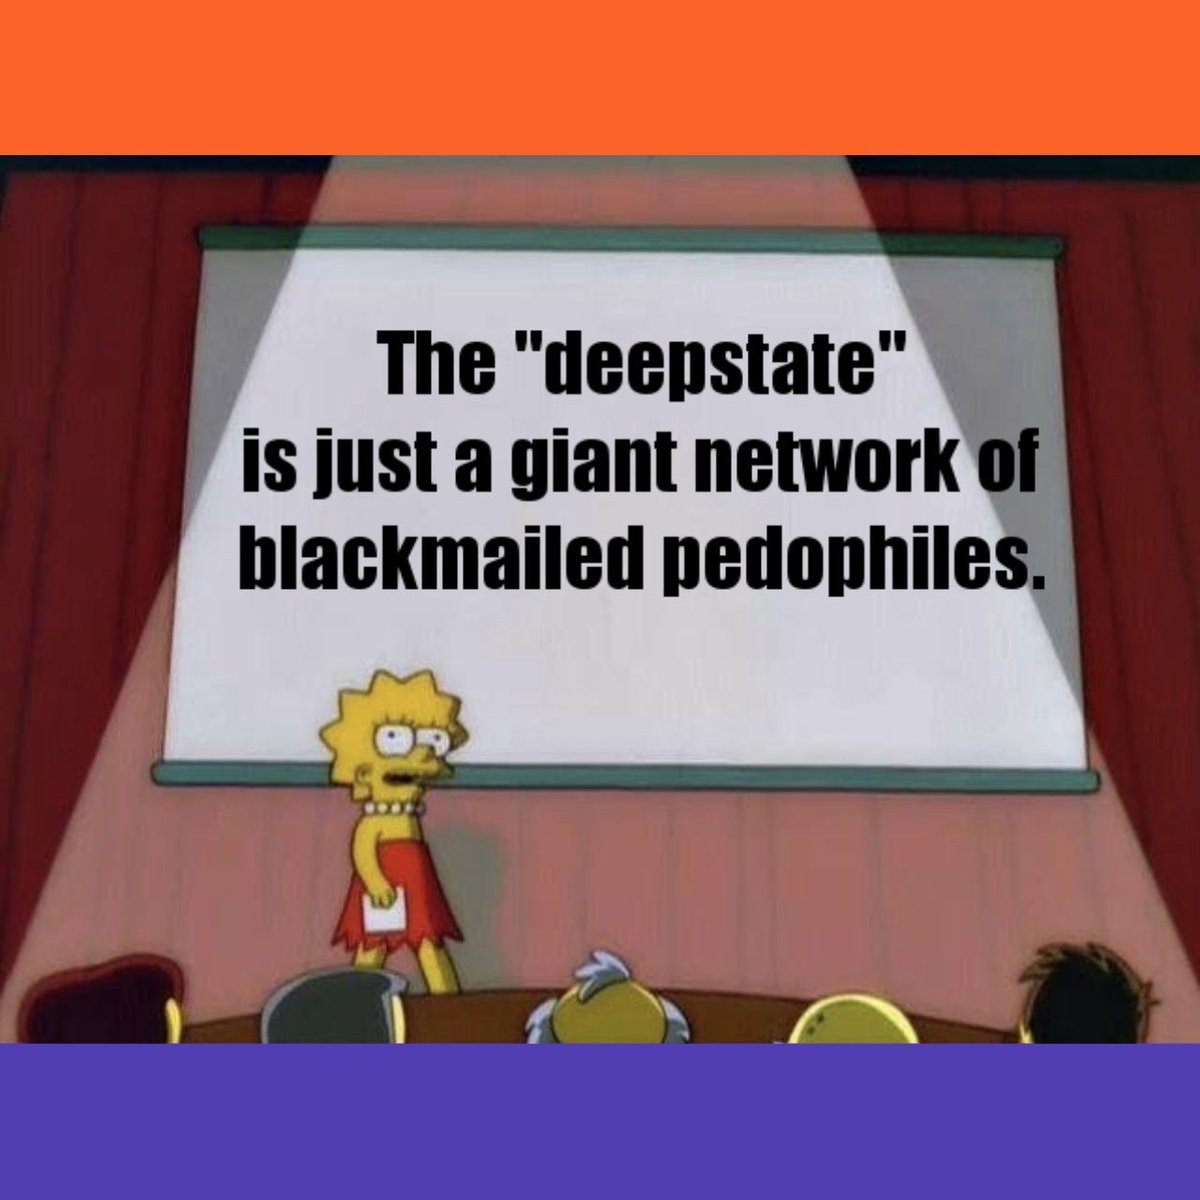 @TuckerCarlson The Deepstate Is A Giant Network of Blackmailed Pedophiles